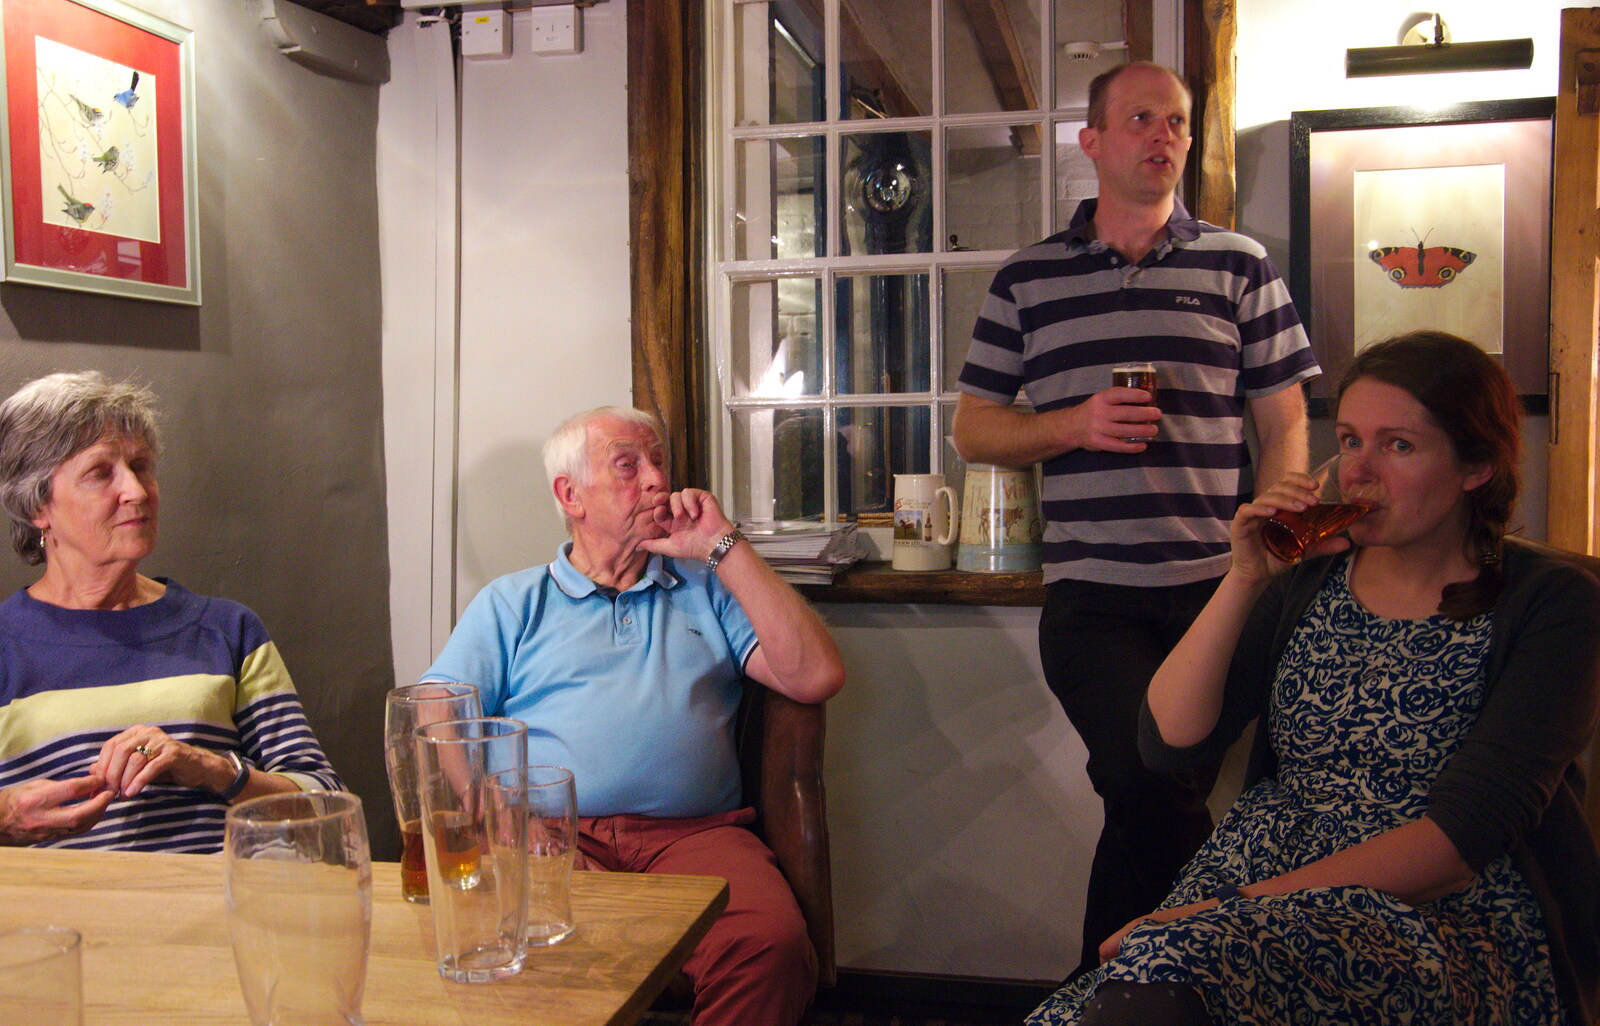 At the White Hart we chat to Colin, Jill and Paul from The BSCC Bike Ride 2019, Coggeshall, Essex - 11th May 2019